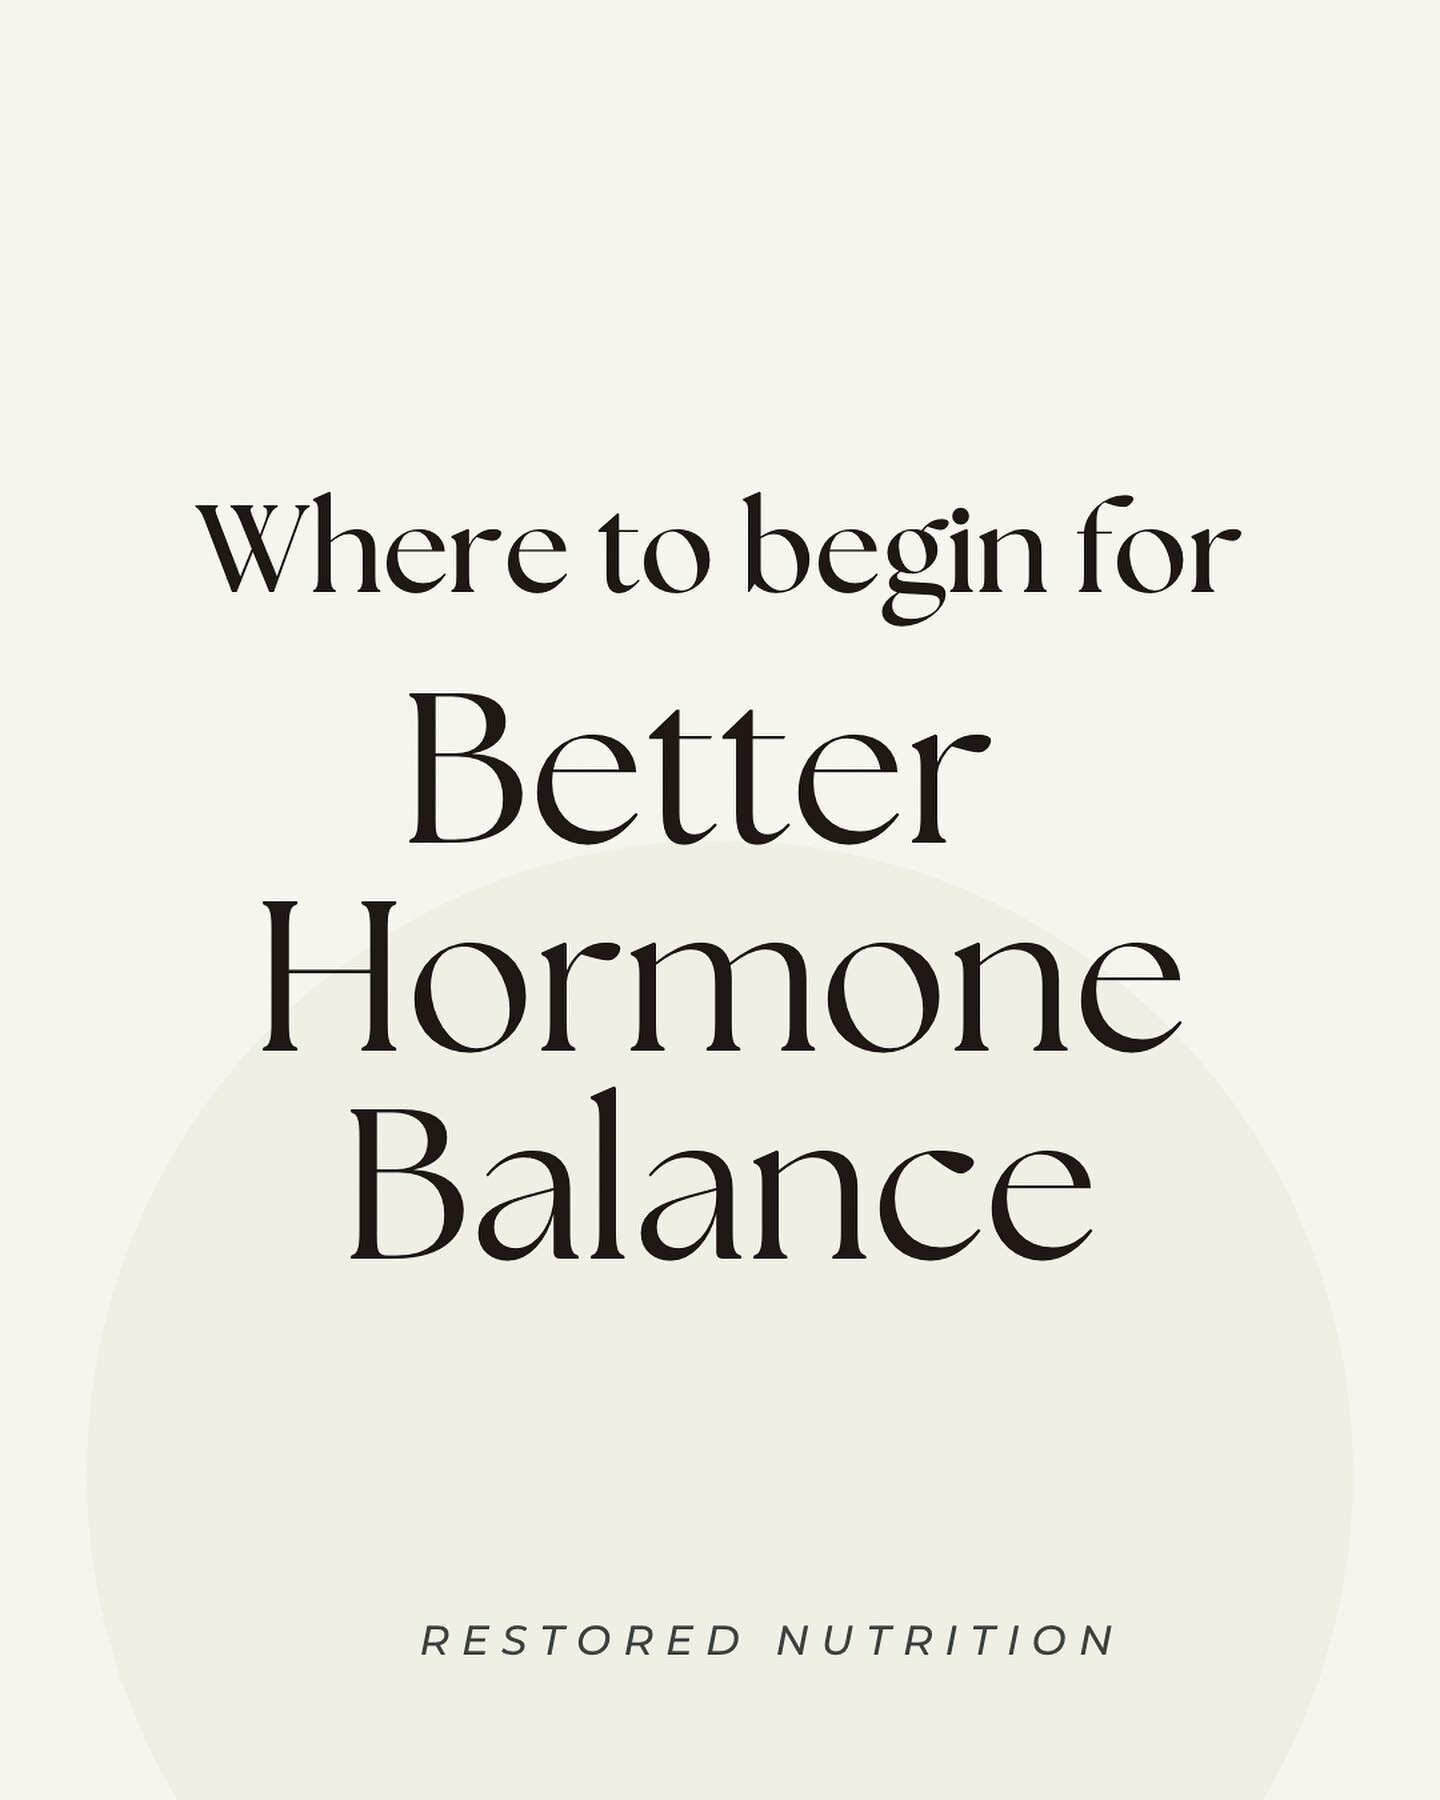 If you are just starting your hormone balancing journey or if you have been working at it for a while, foundations are essential to success. Most people jump into restrictive diets or fancy supplements when in fact some of the most foundational thing